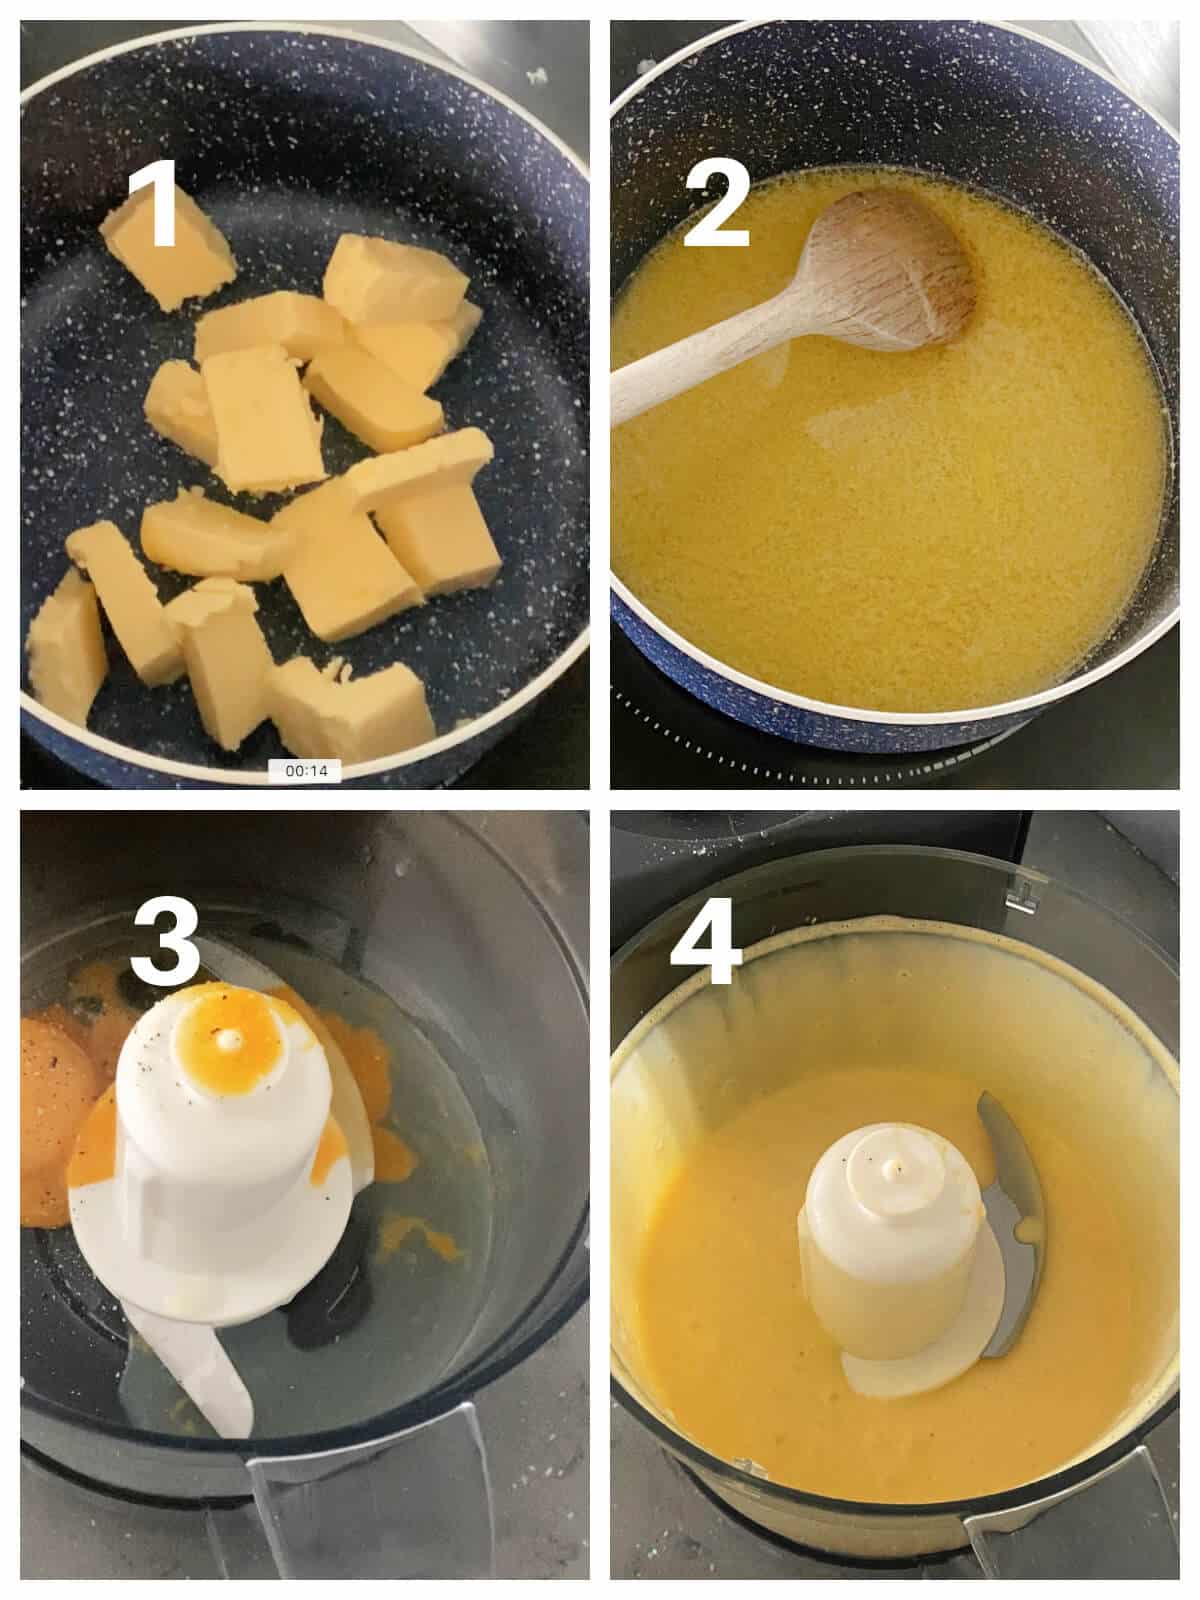 Collage of 4 photos to show how to make hollandaise sauce.